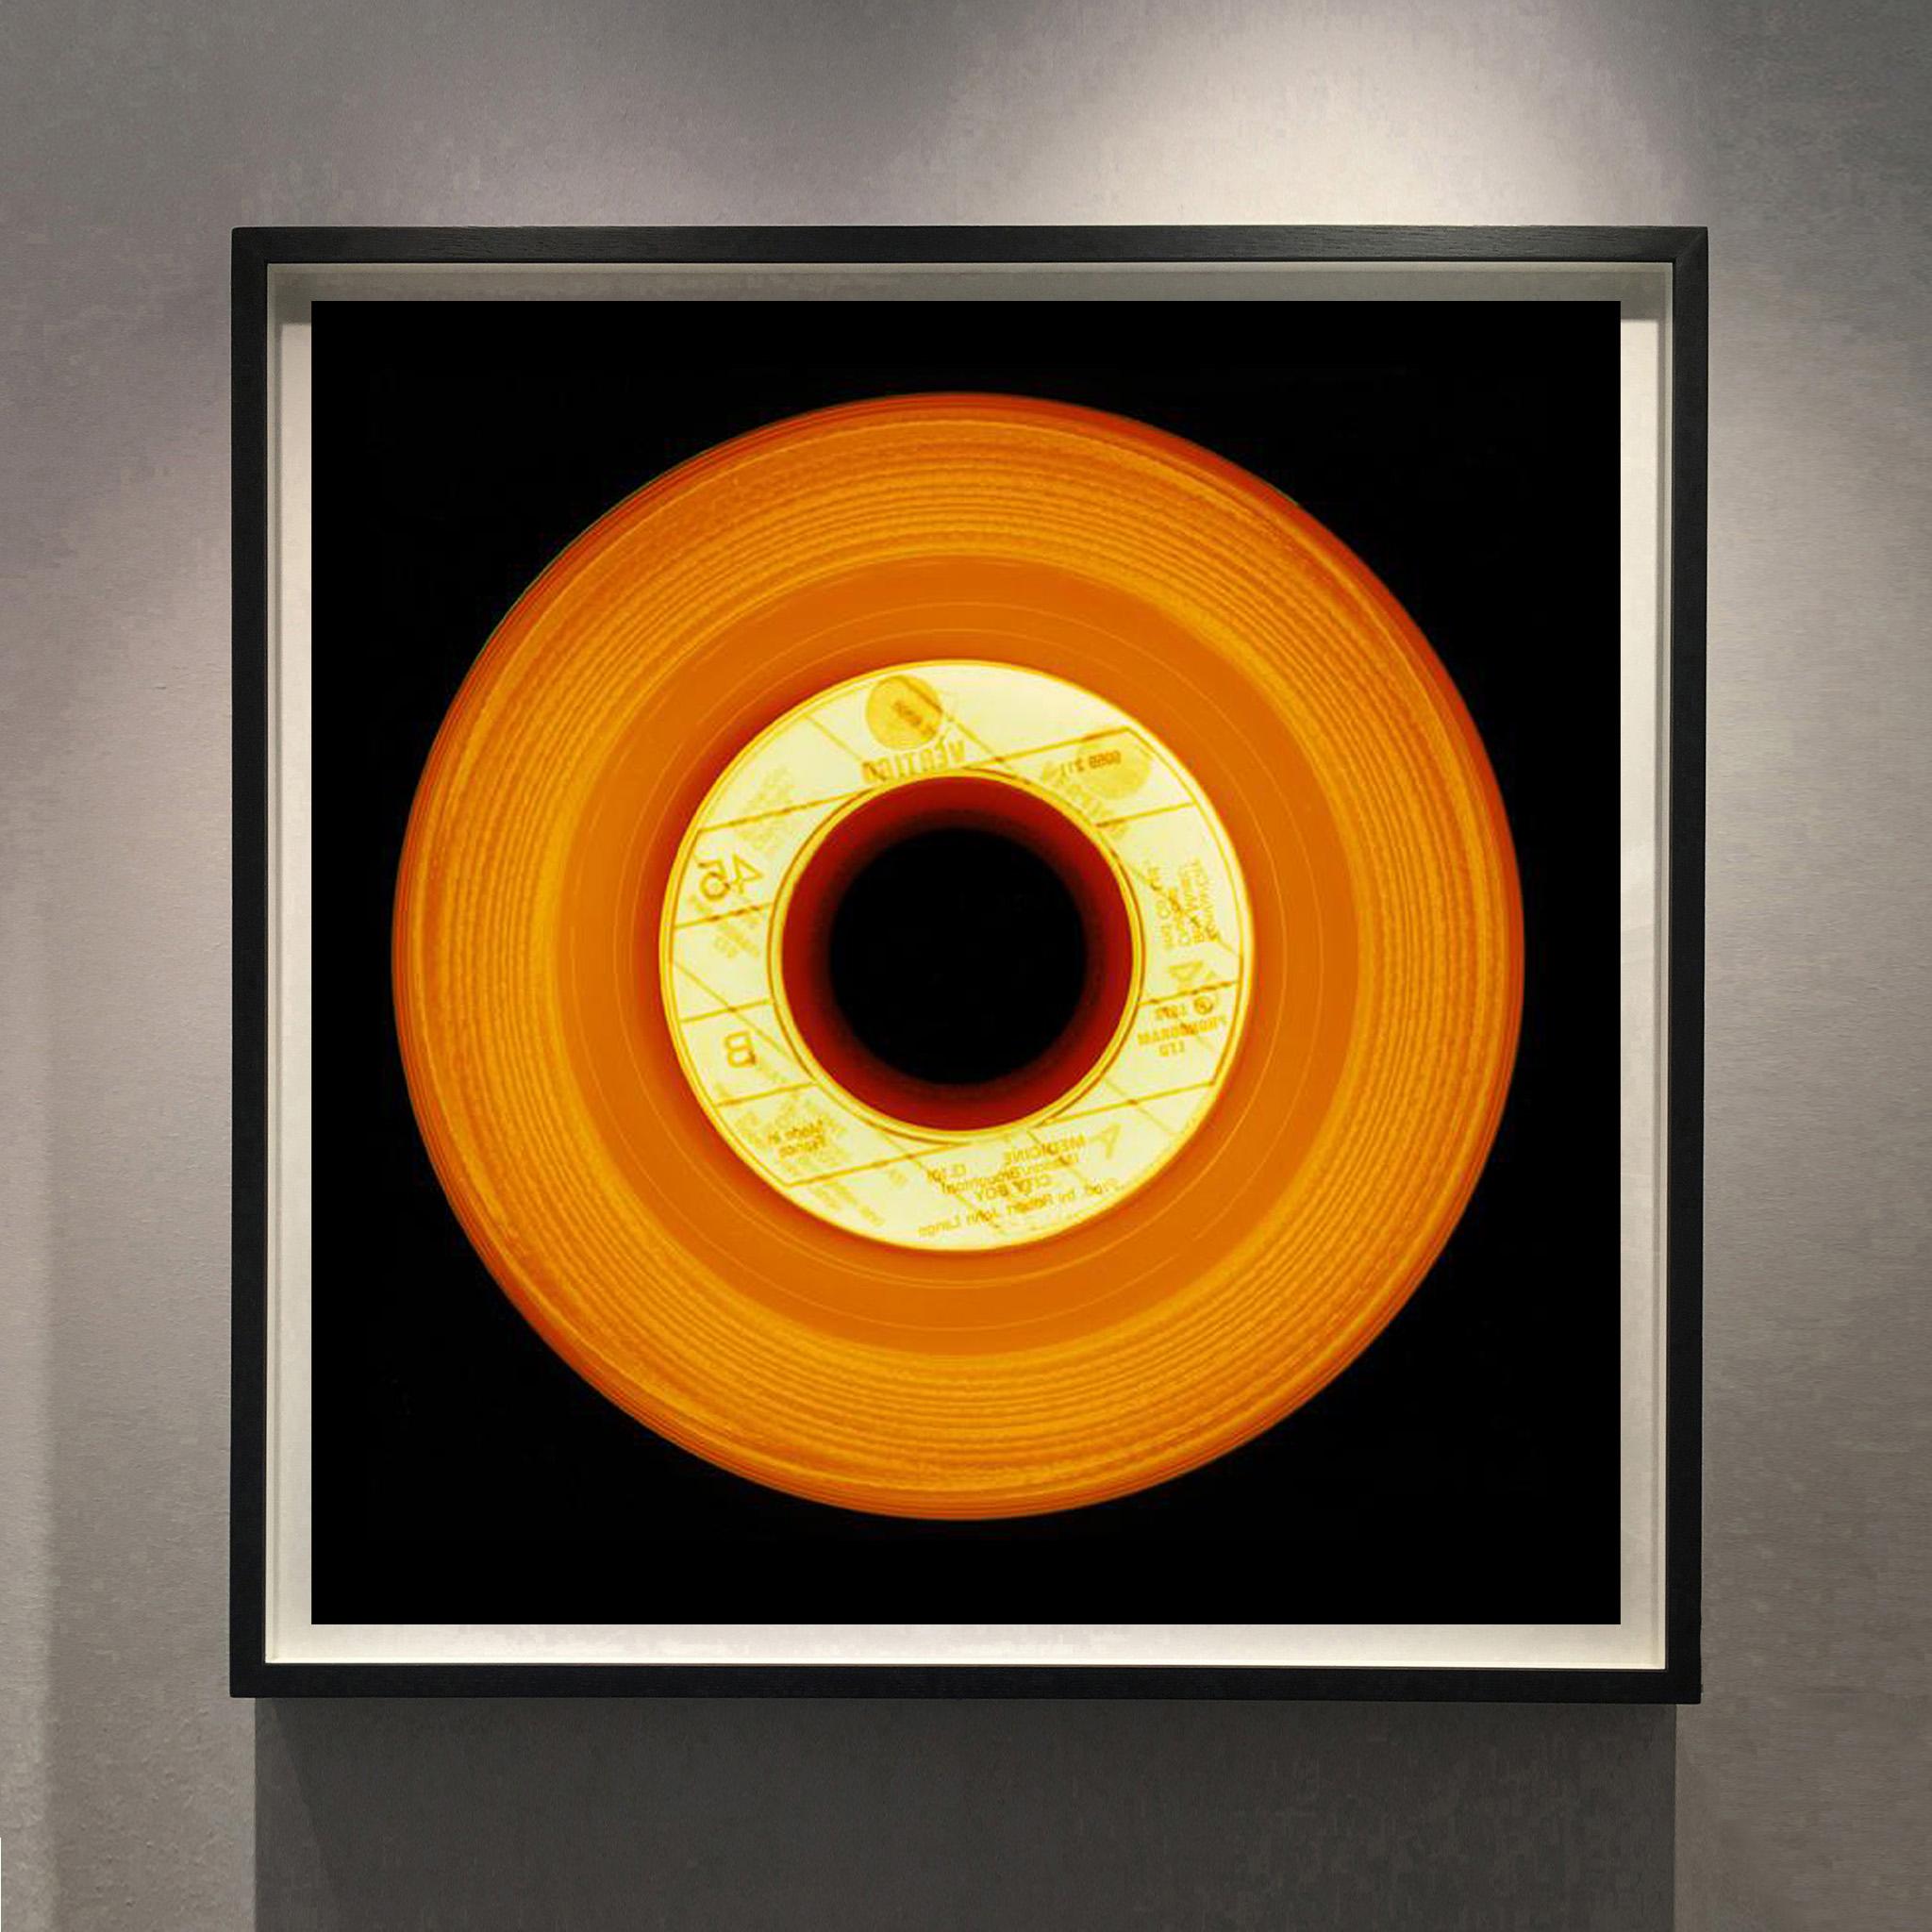 Made in France from the Heidler and Heeps Vinyl Collection.
Acclaimed contemporary photographers, Richard Heeps and Natasha Heidler have collaborated to make this beautifully mesmerising collection. A celebration of the vinyl record and analogue